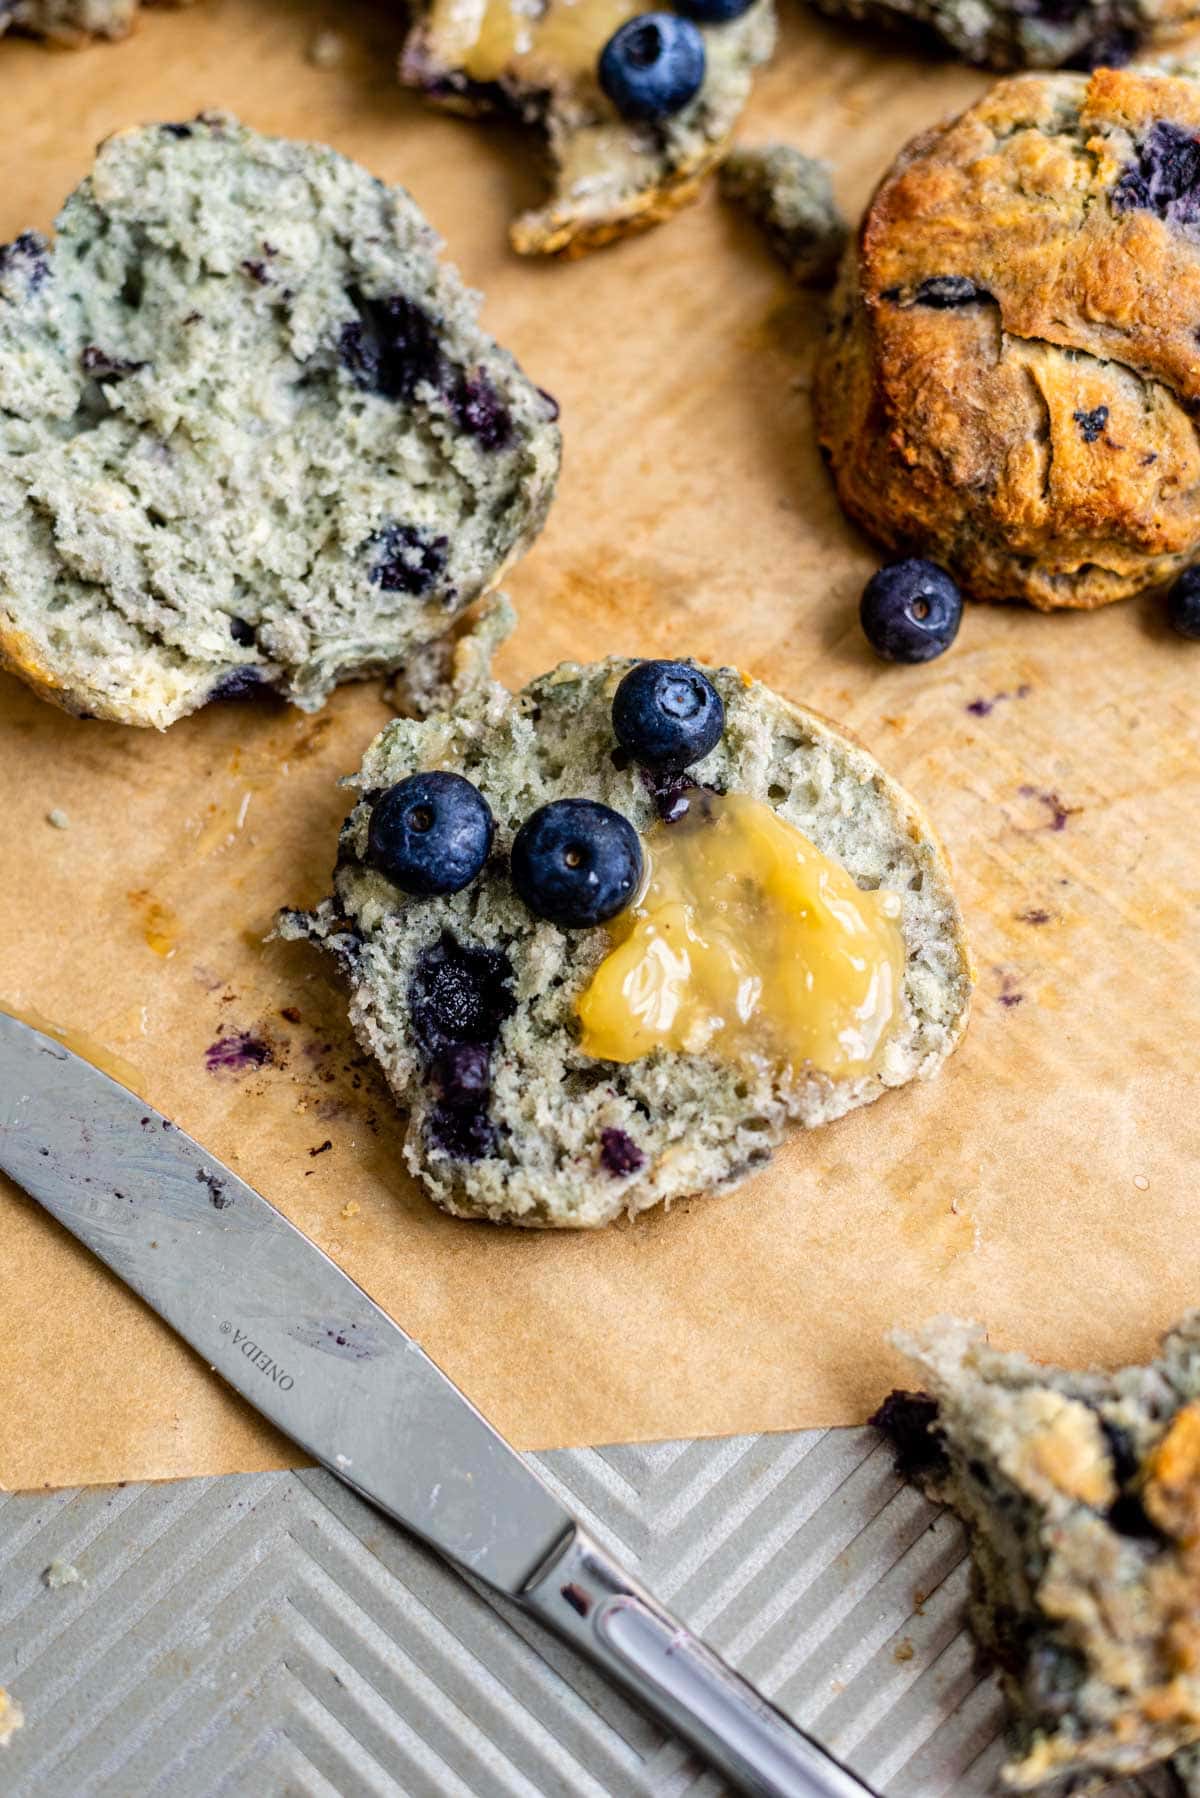 A sliced blueberry biscuit with lemon curd on brown parchment.